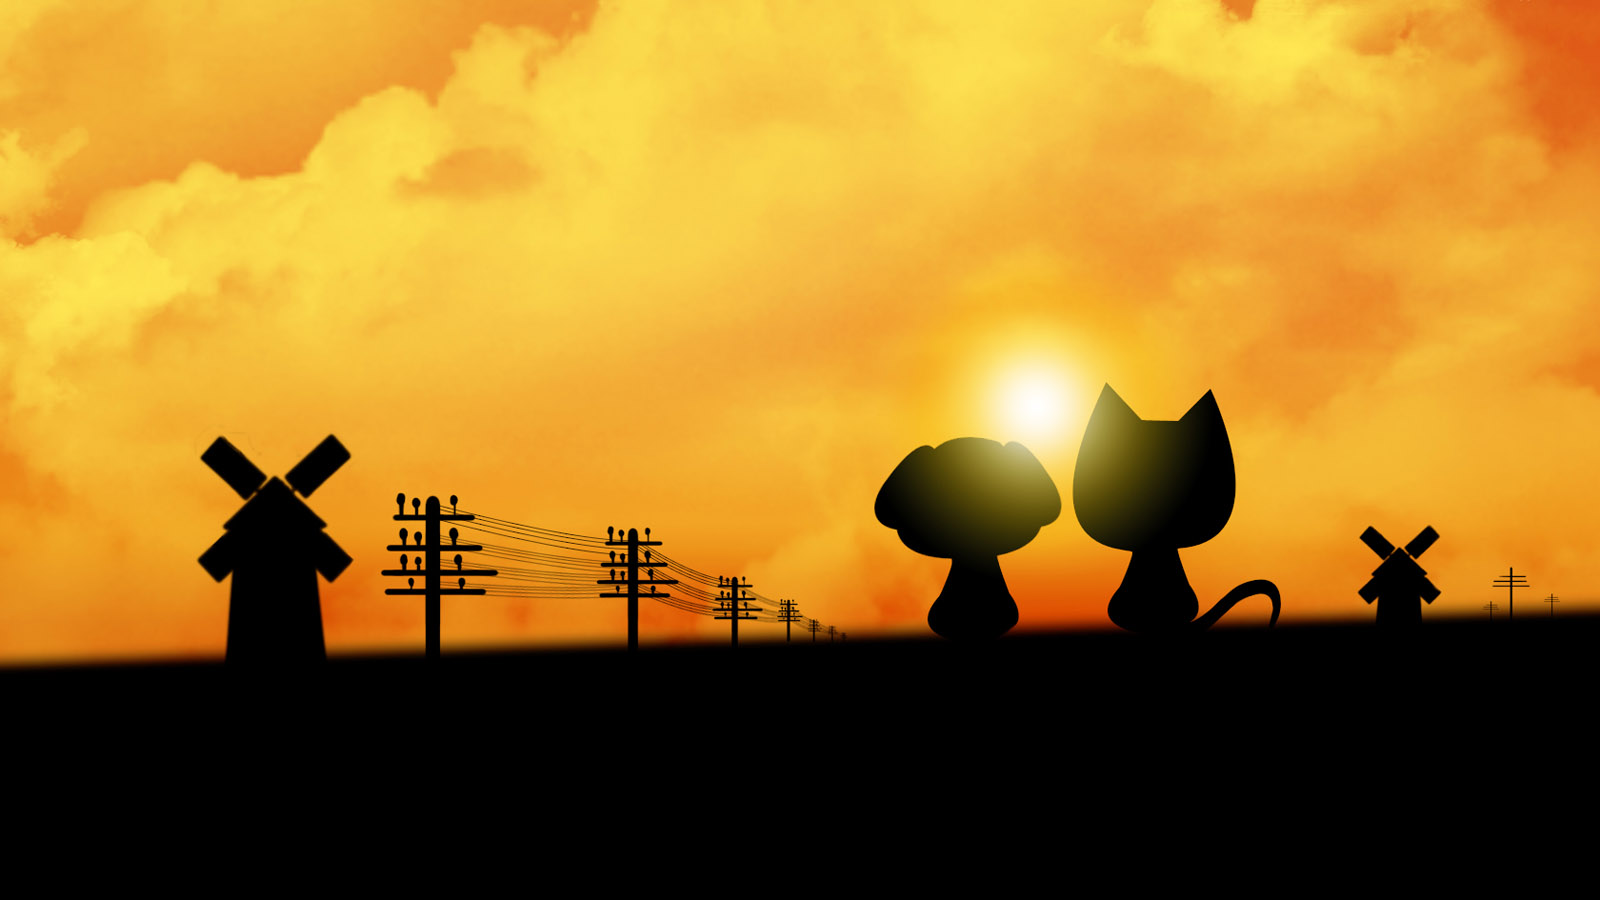 Small left and small right desktop wallpaper under the sunset